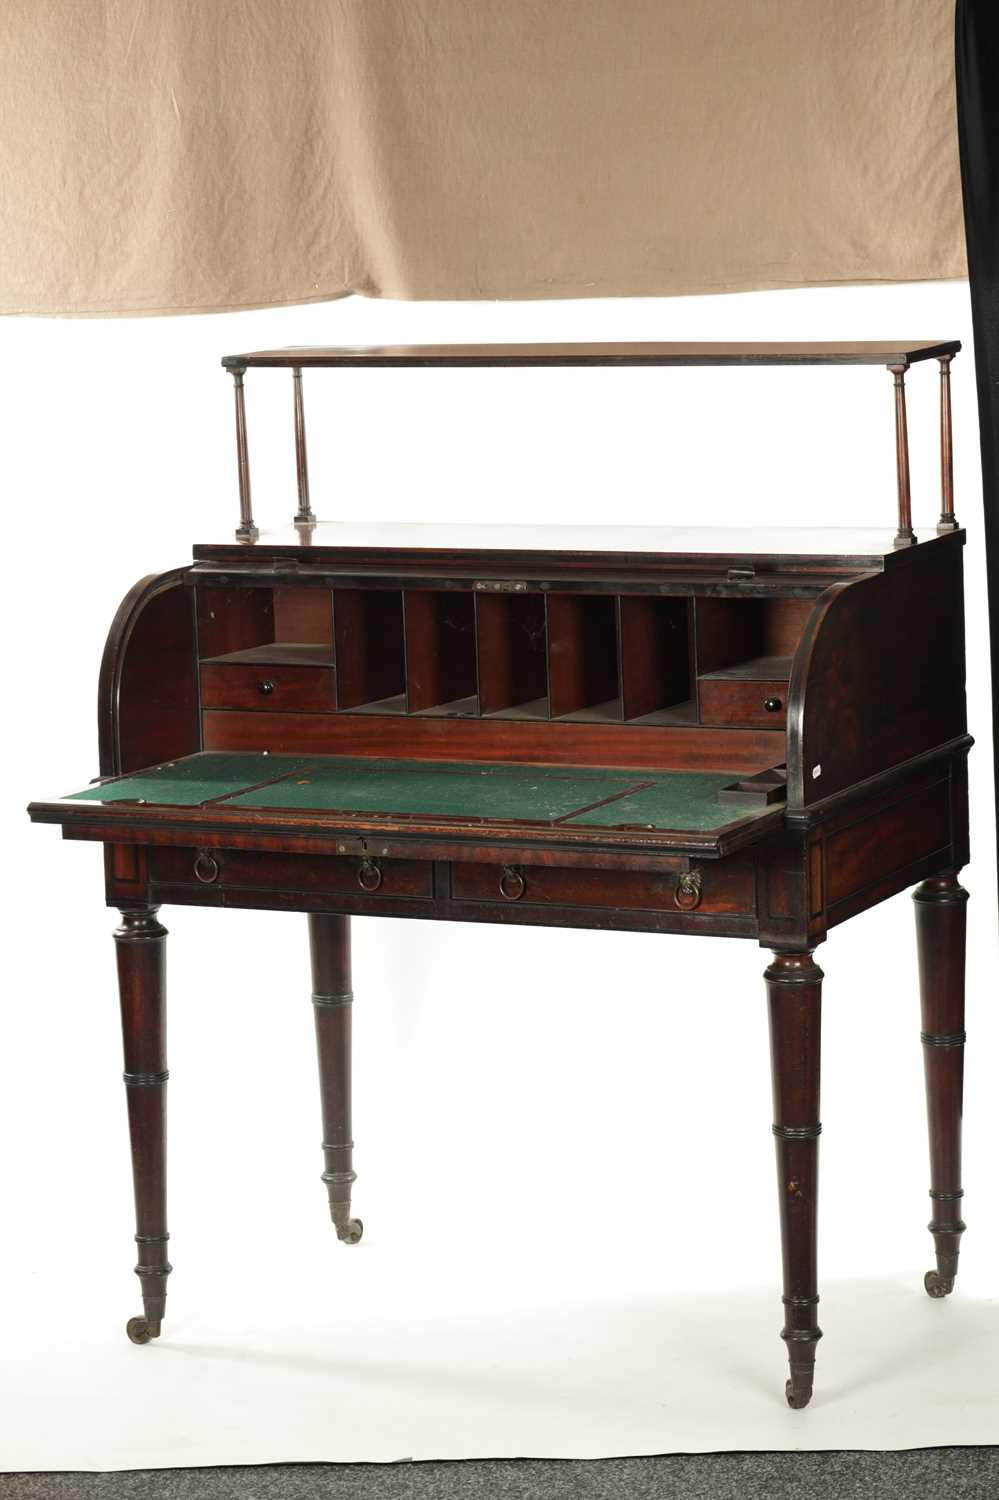 A REGENCY FIGURED MAHOGANY AND EBONY STRUNG TAMBOUR FRONT CYLINDER DESK - Image 2 of 8